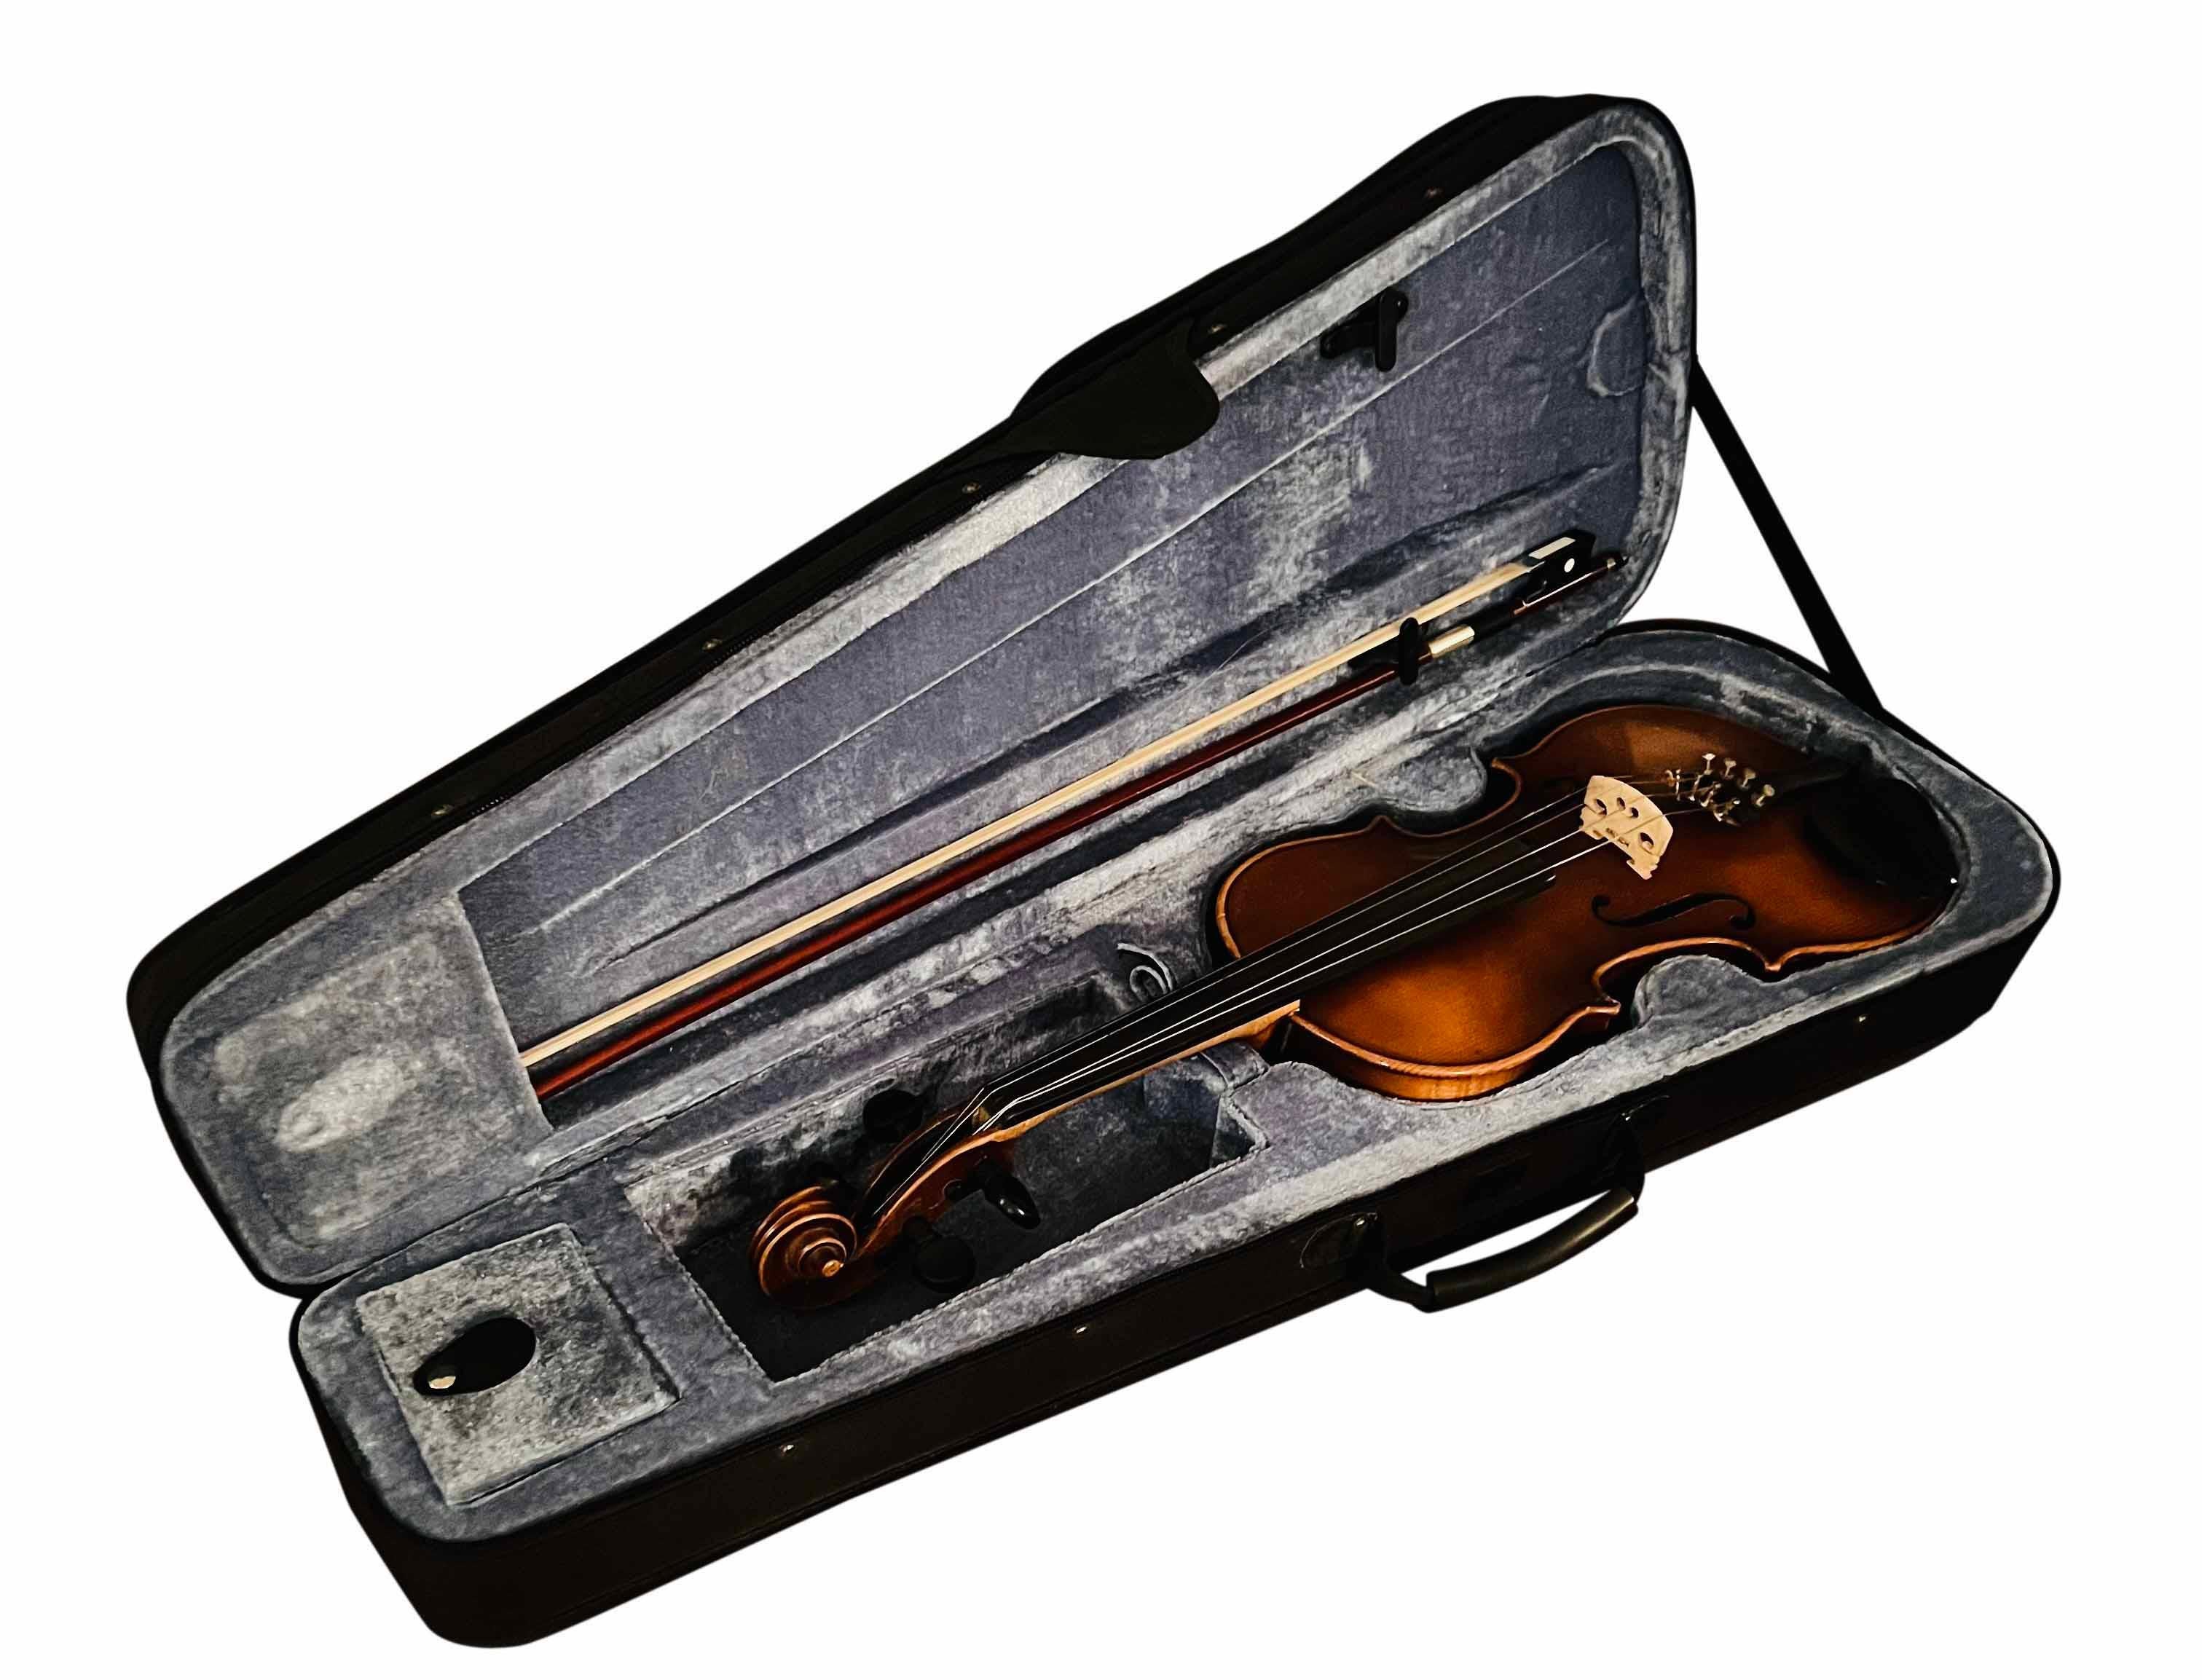 1970 3/4 E.R. Pfretzschner Hand-Crafted Violin in the Style of A. Stradivarius For Sale 5